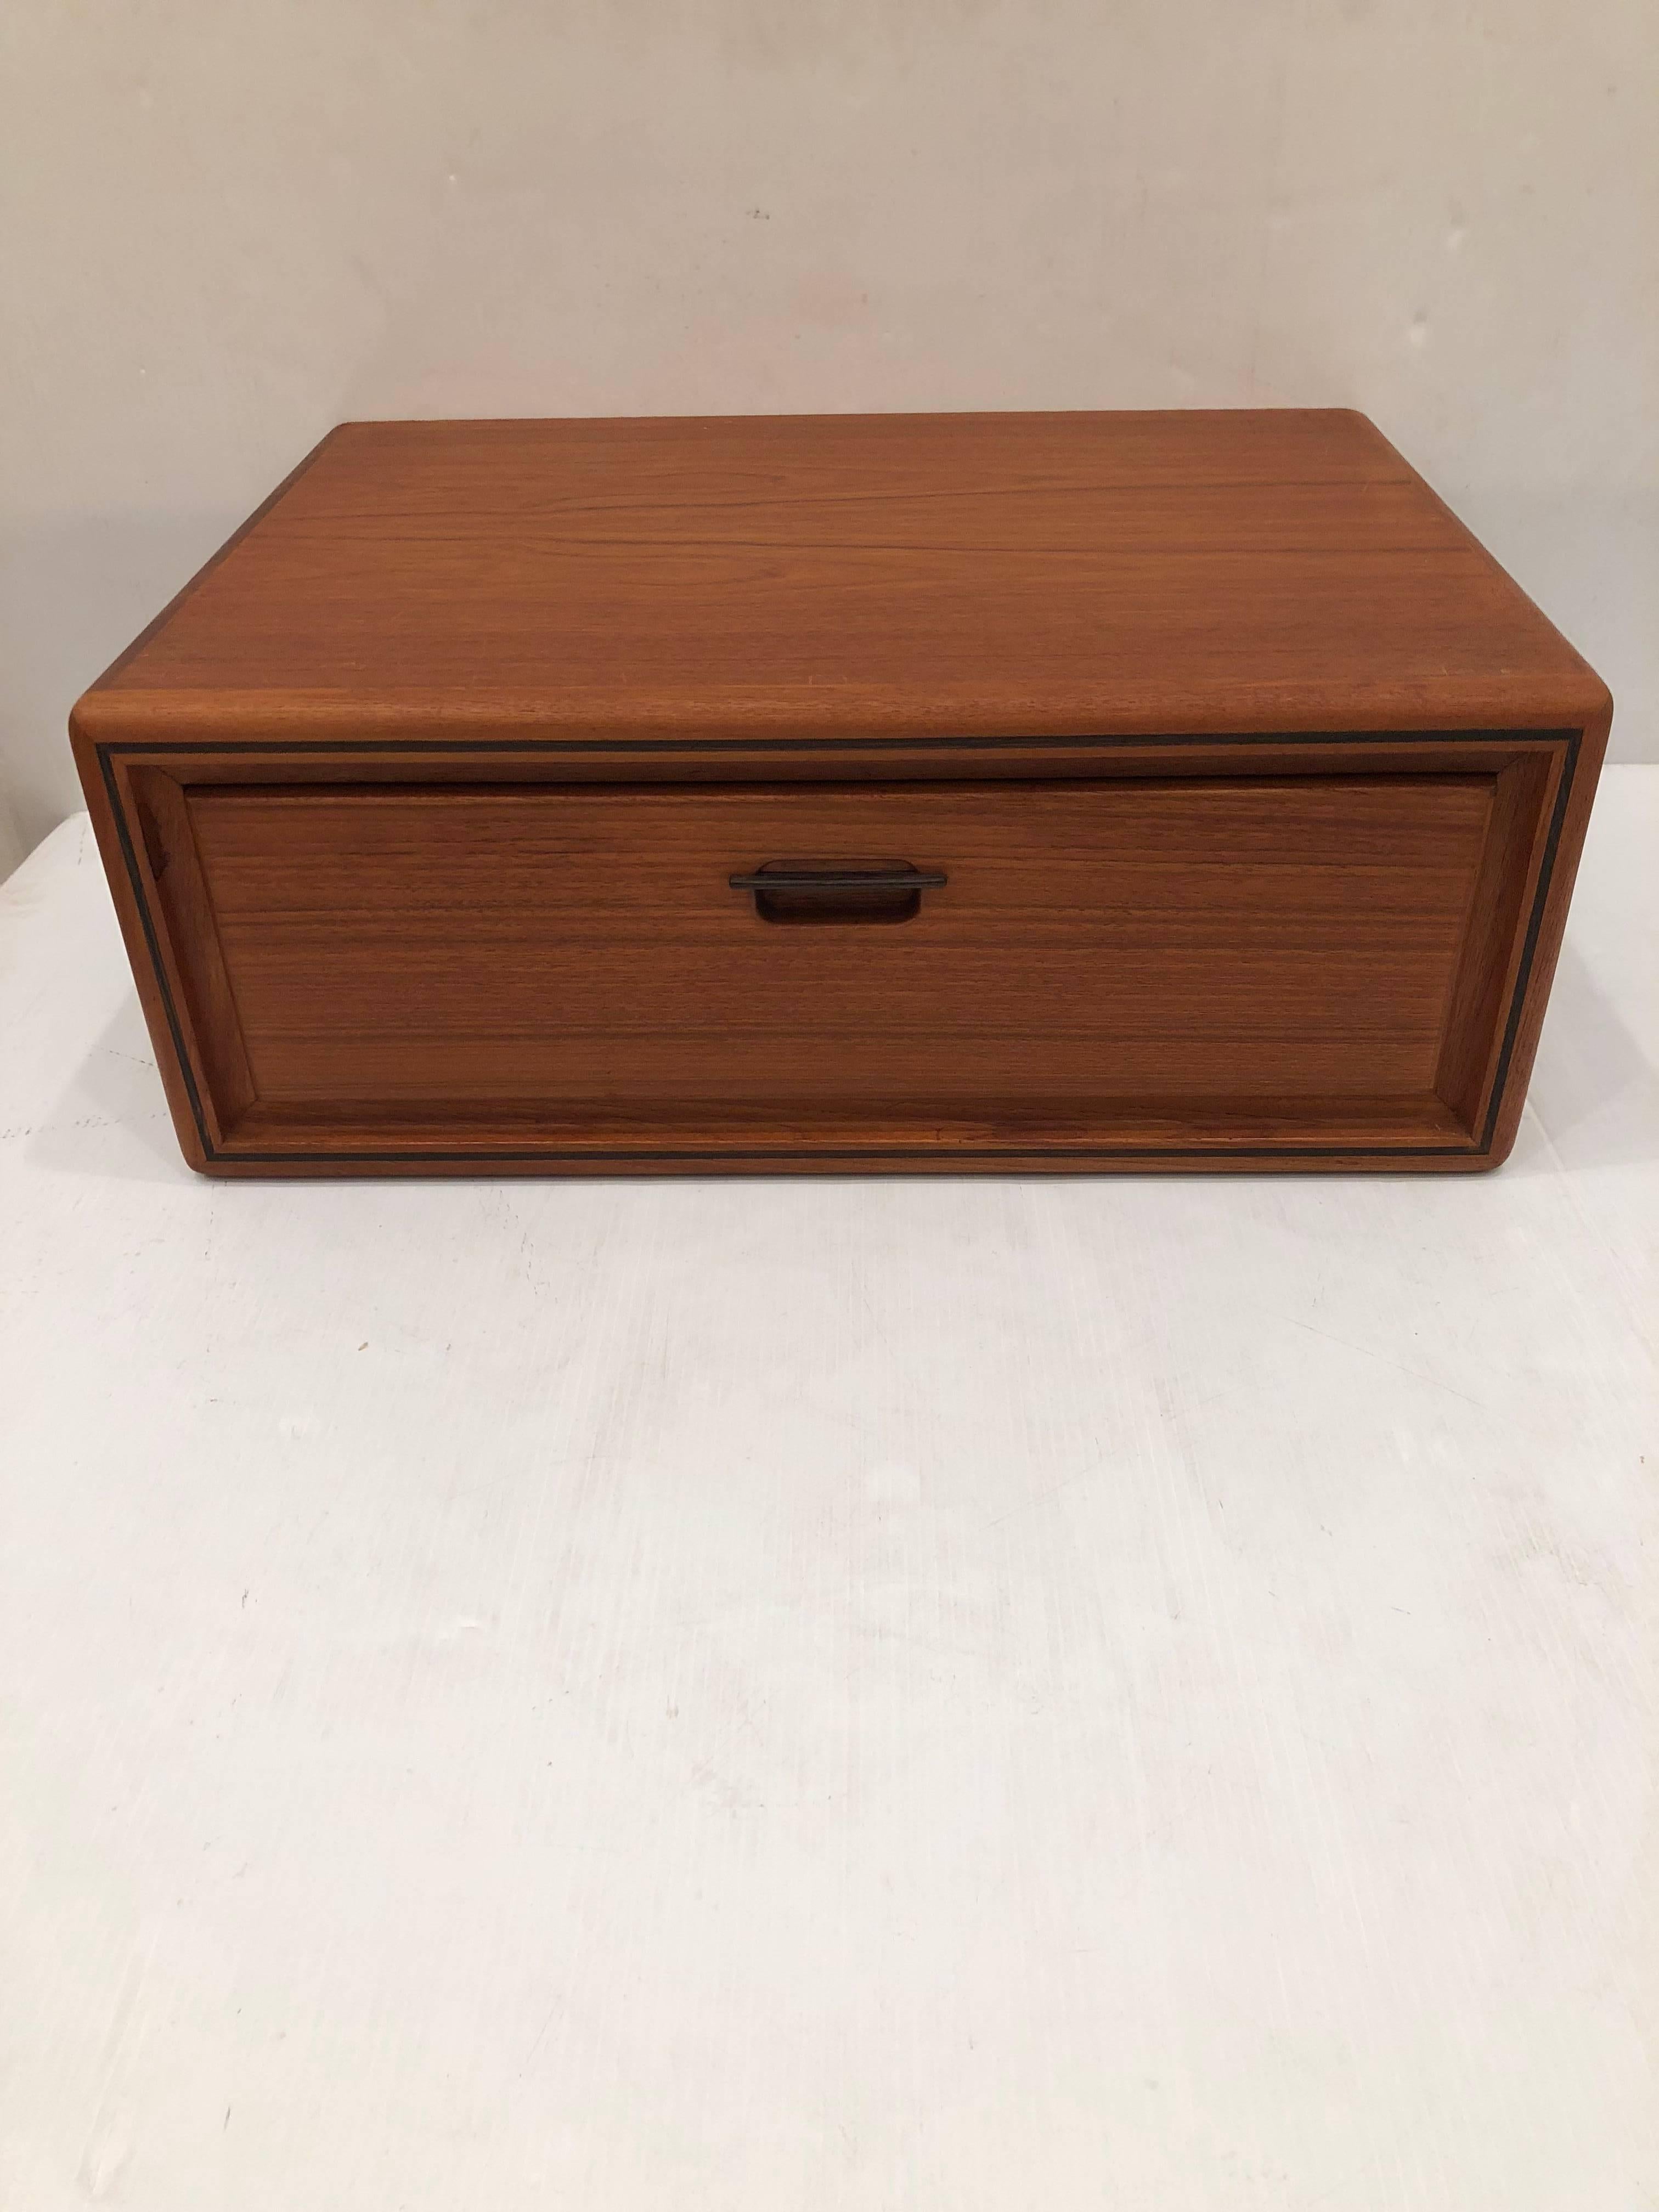 Beautiful pair of wall hanging floating nightstands, circa 1960s high quality pieces single drawer, with rosewood handle and trim edge, freshly refinished, practical and elegant.